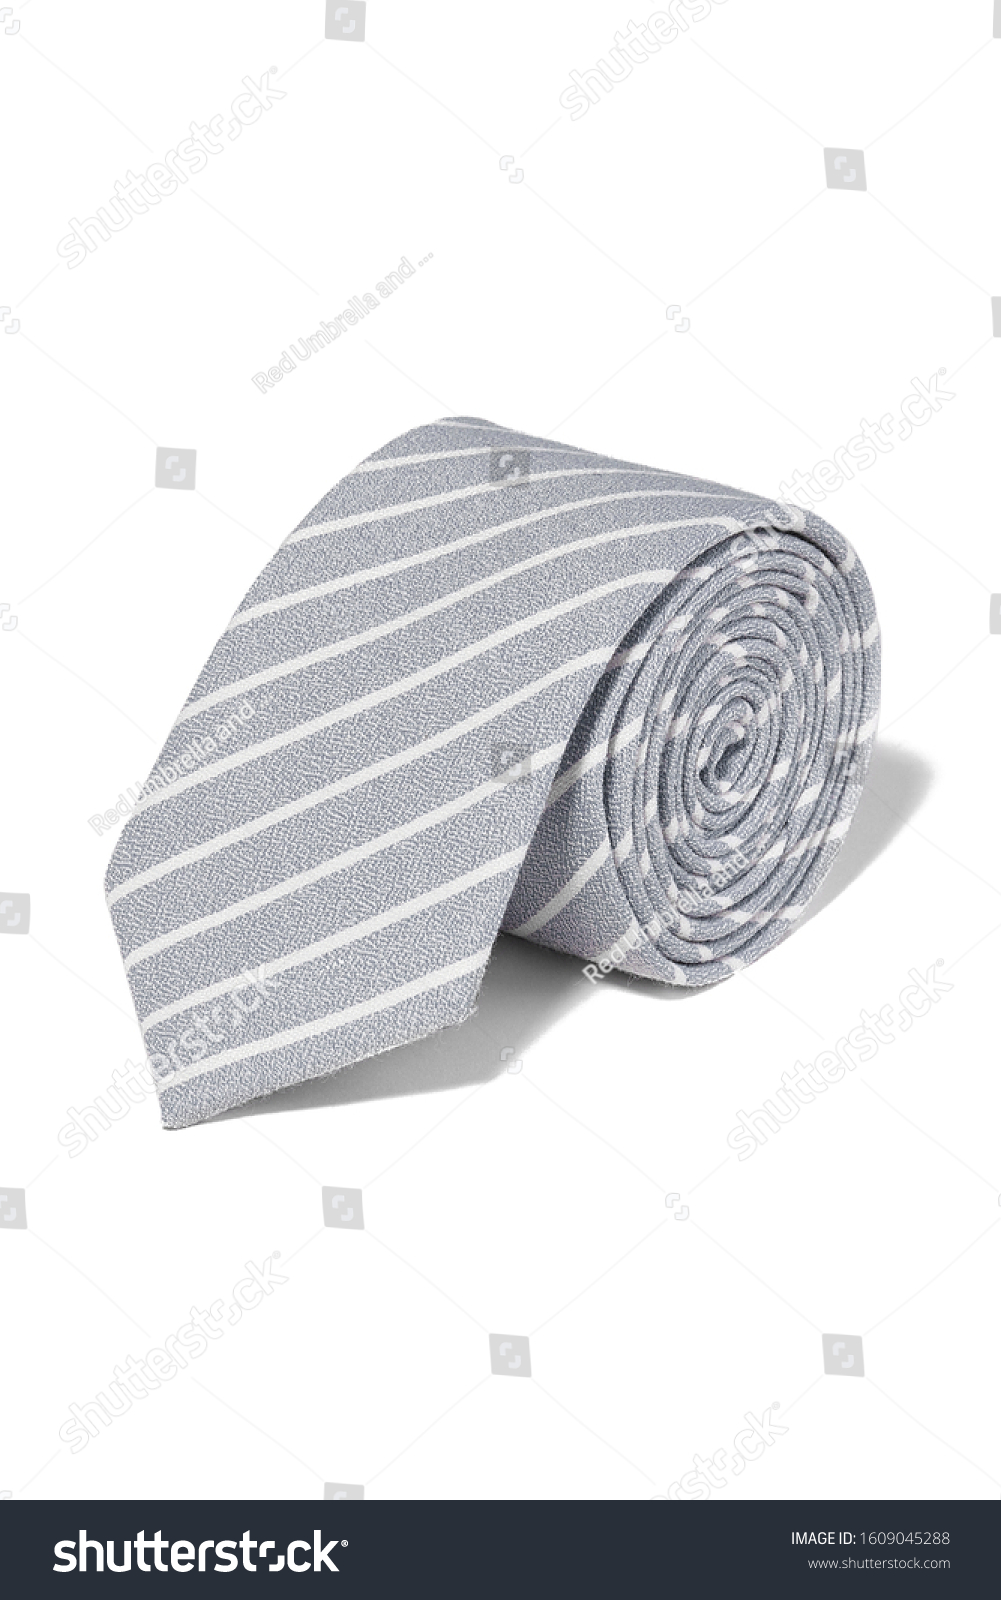 Subject shot of a rolled-up classic cotton tie made of silver gray textured fabric with white diagonal stripes. The necktie is isolated on the white background. #1609045288